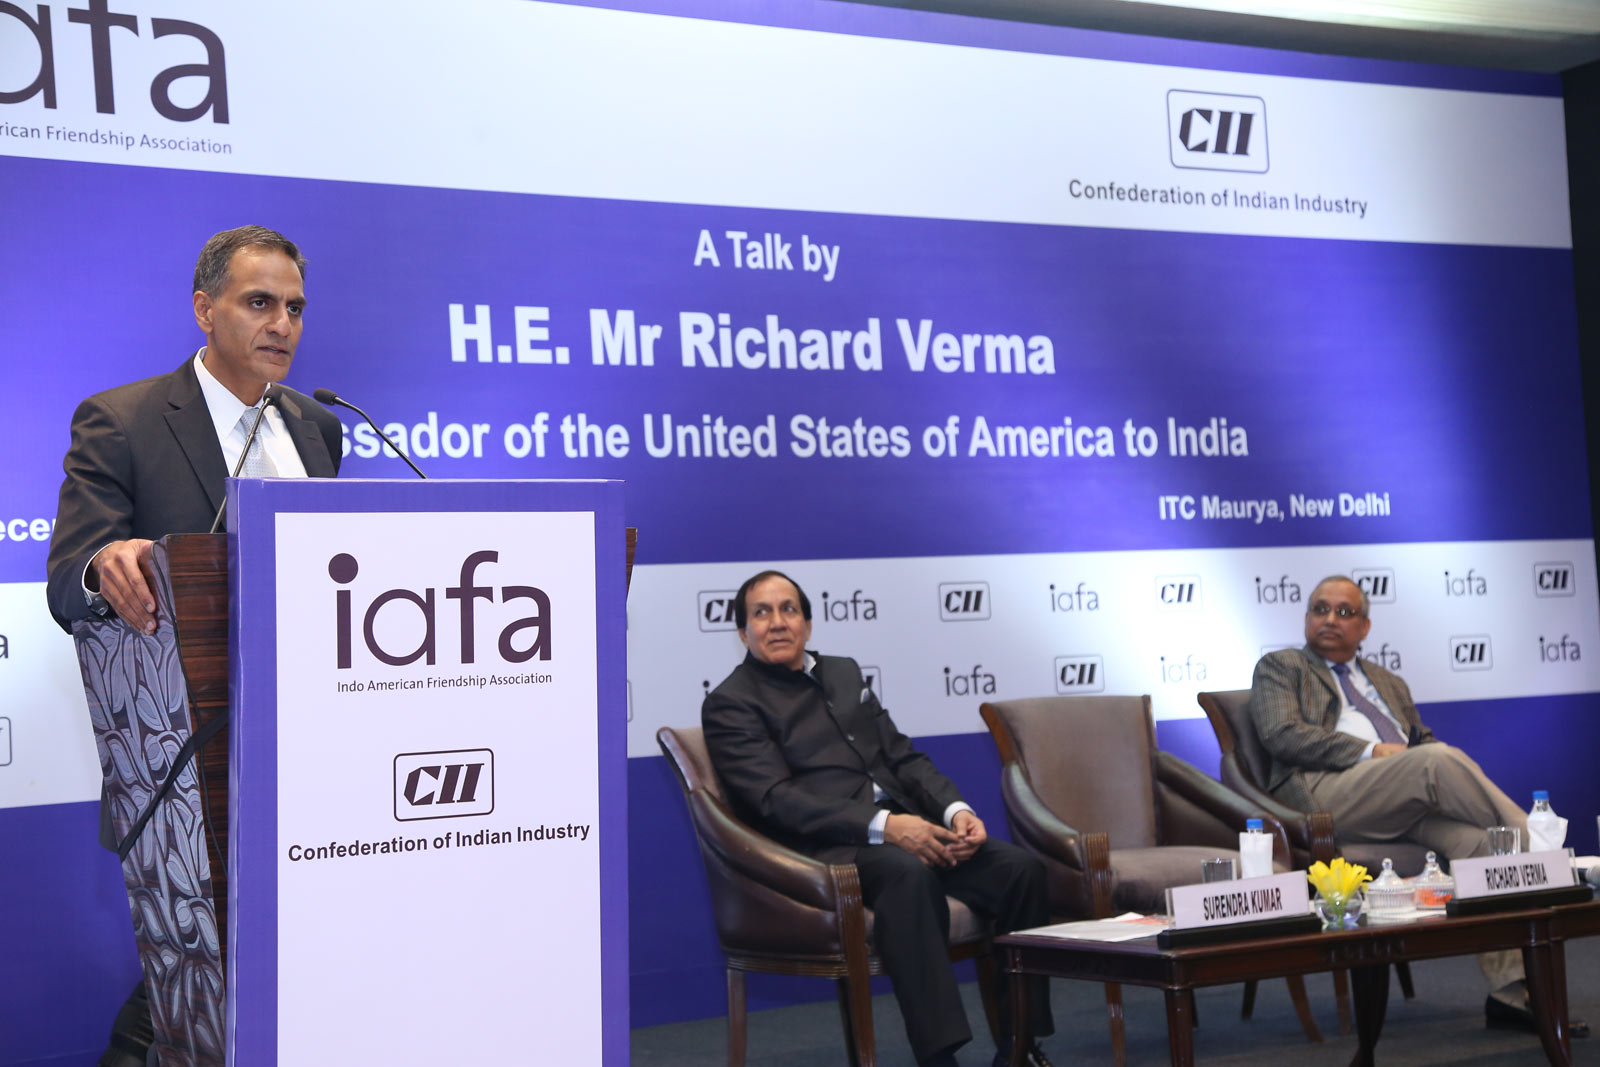 A talk on: India-US Relations on Dec 6th 2016 by the US Amb. Richard Verma at ITC Maurya New Delhi